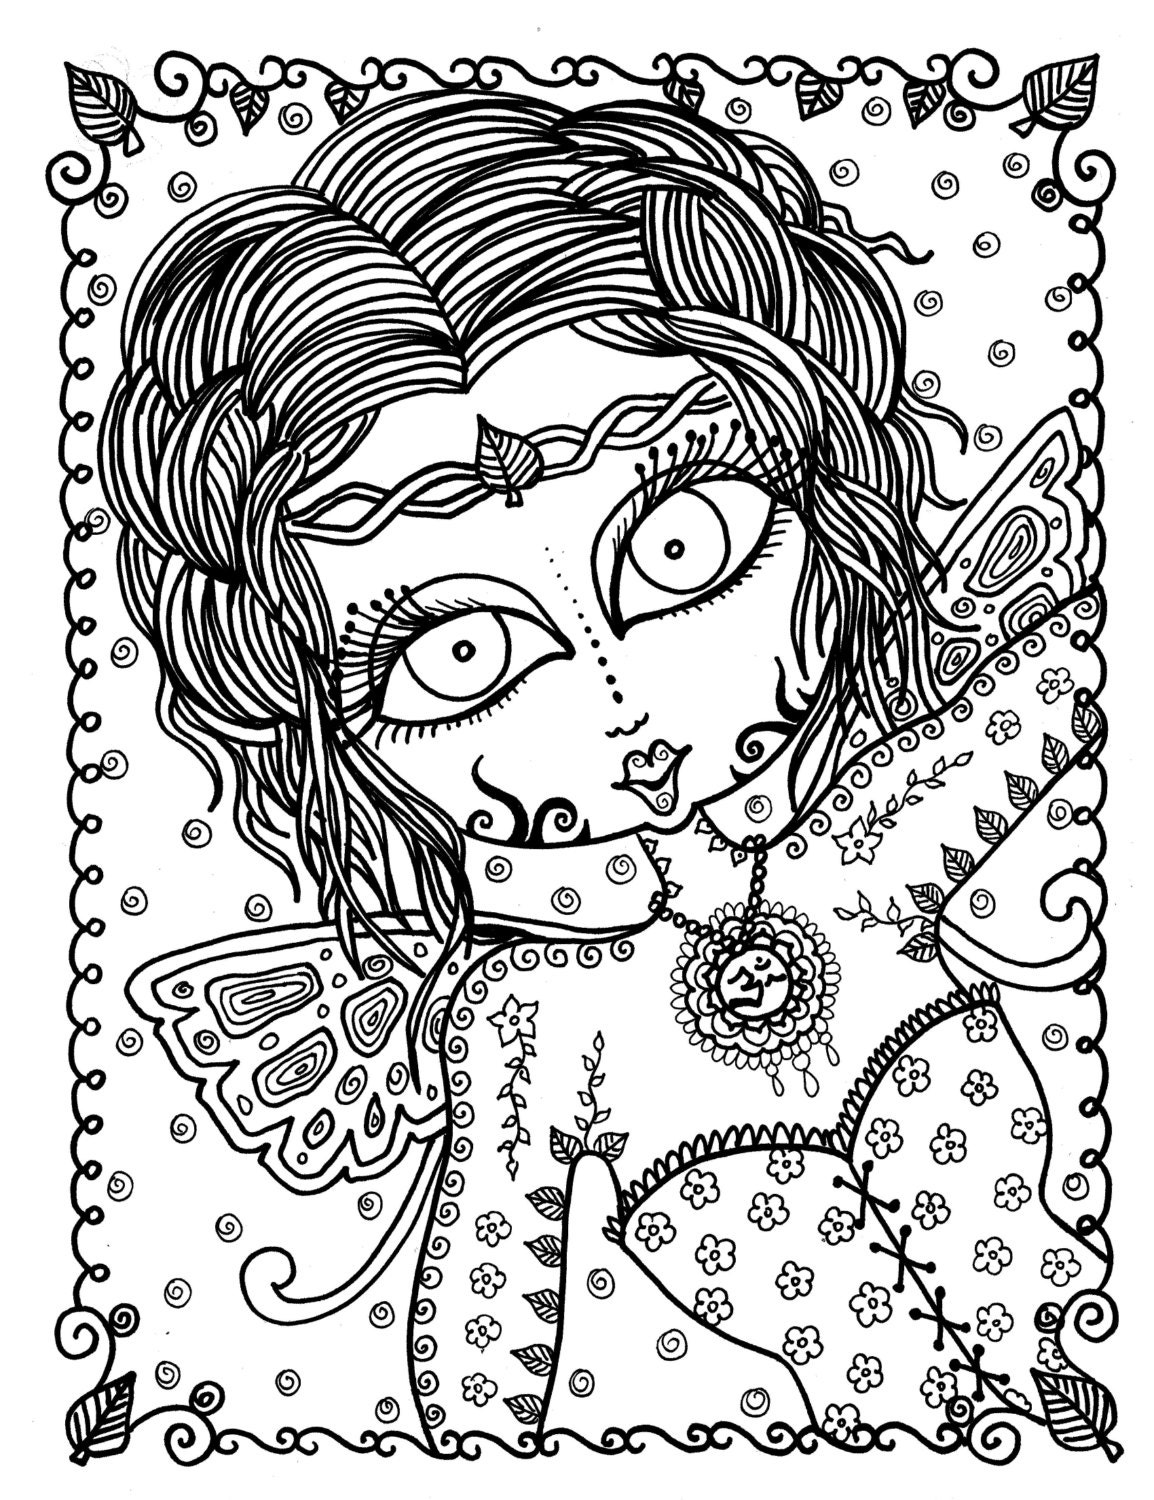 Artsy Girls Coloring Book PDF Instant Download. Fun, Creative Girls to Color.  Knitting, Sewing, Coloring, Nail Art, Diamond Painting. 